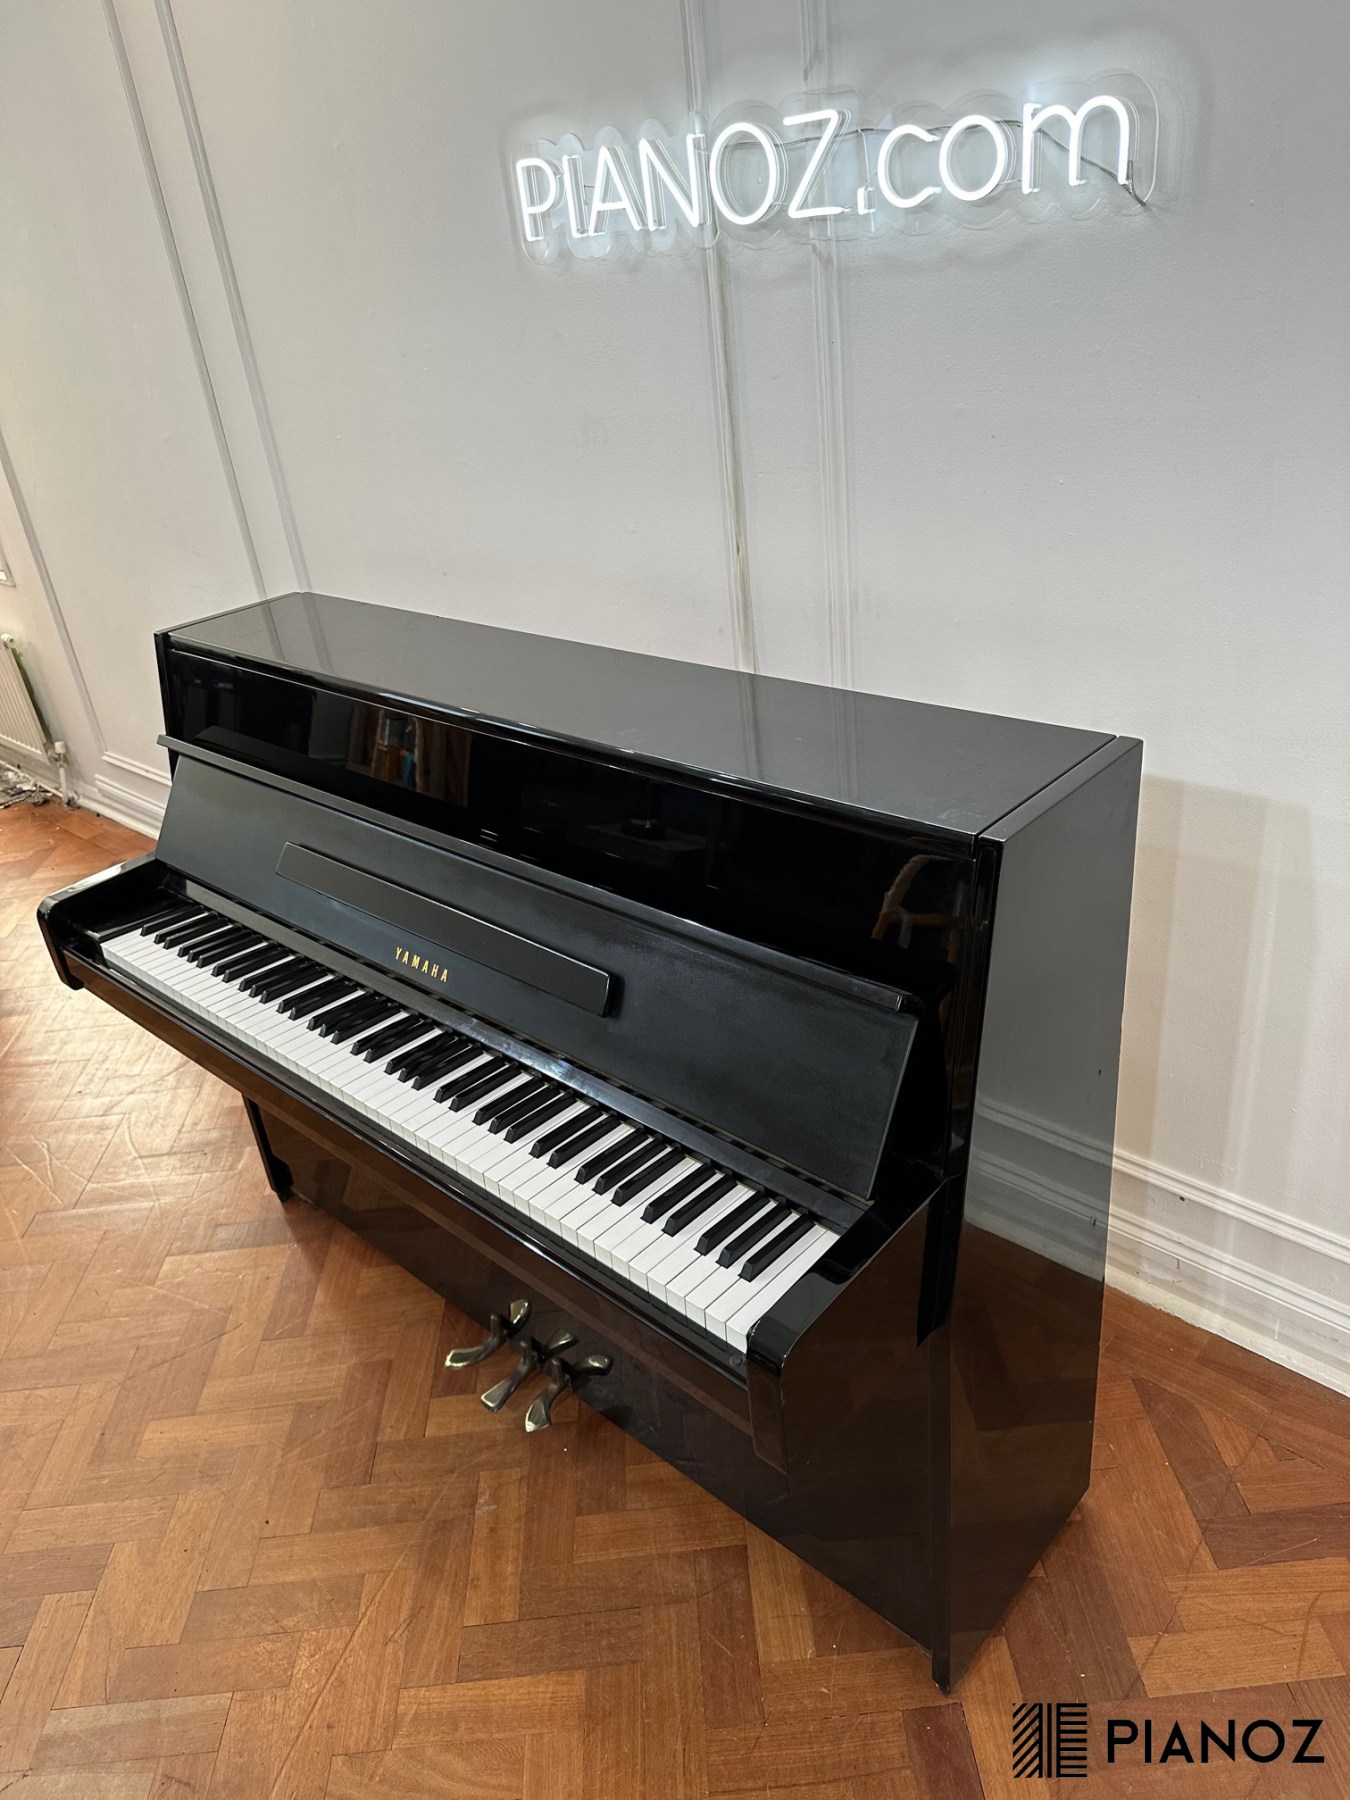 Yamaha Japanese Upright Piano piano for sale in UK